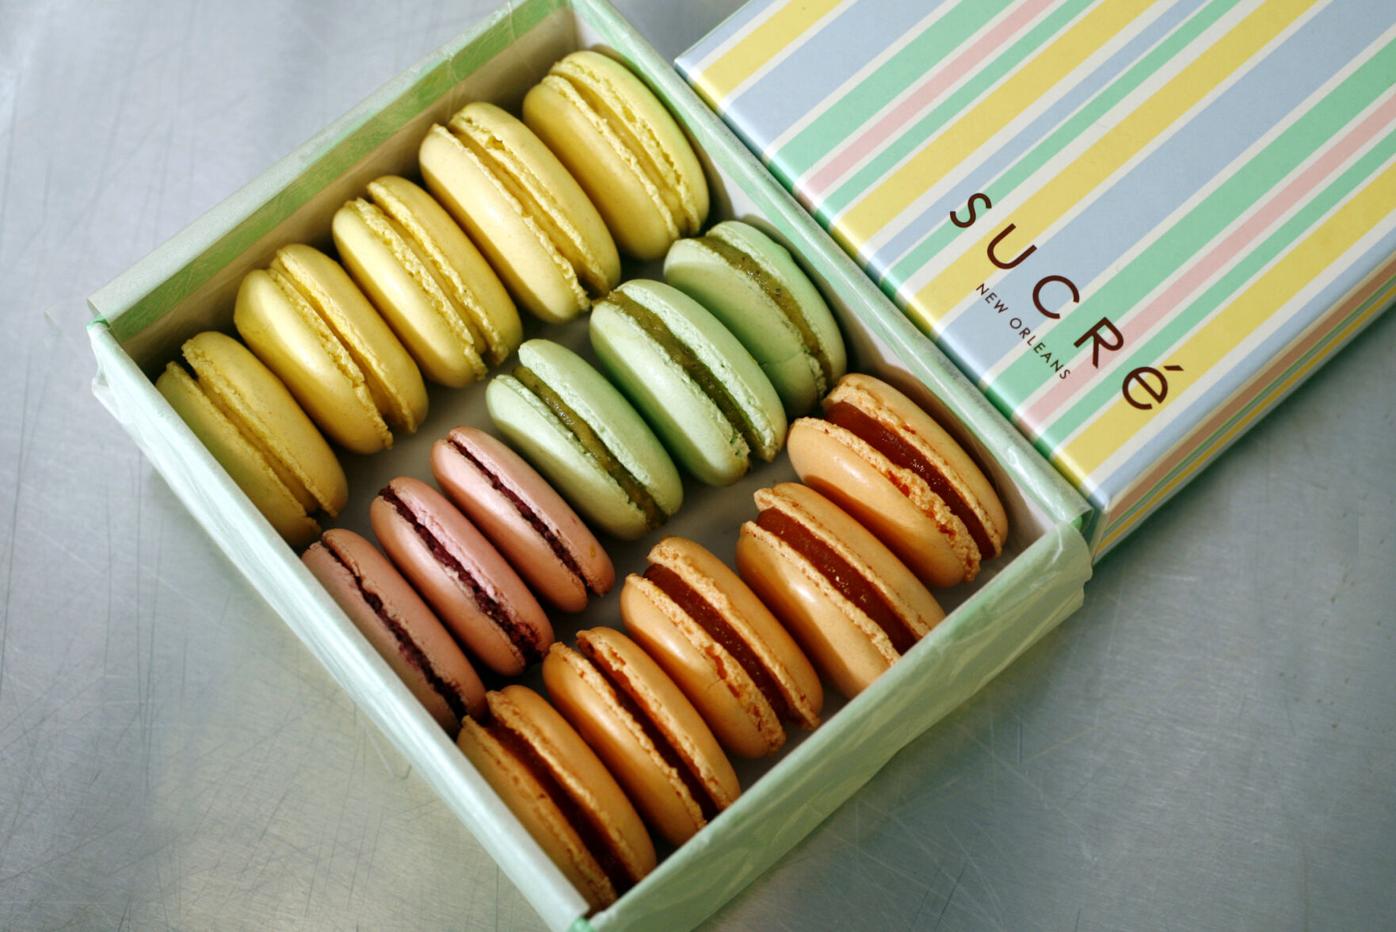 Here's What's New in June! - Olivia Macaron